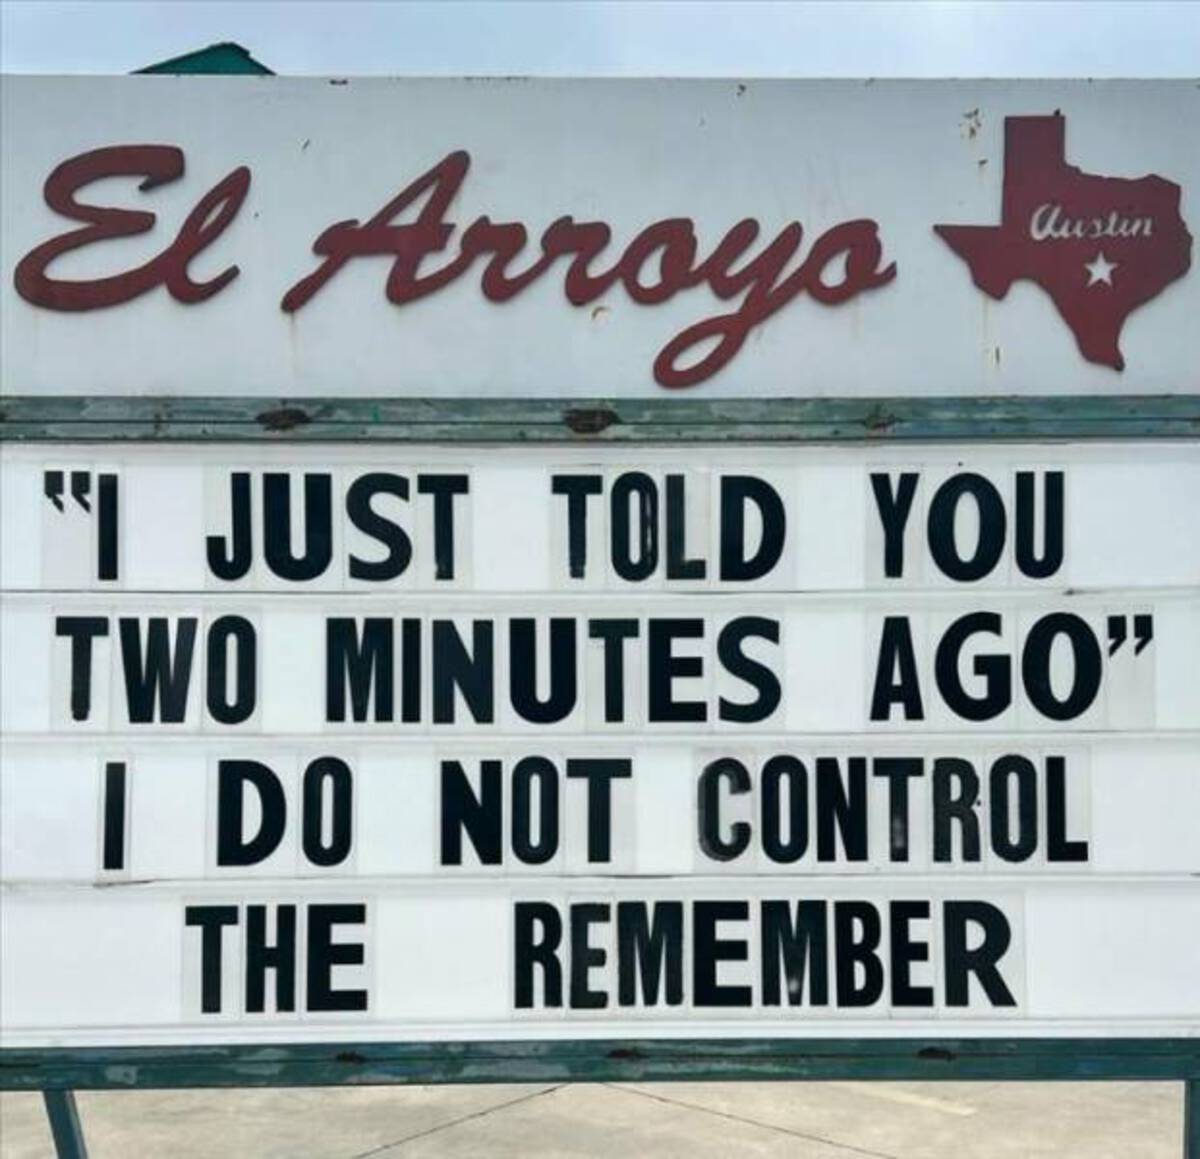 signage - El Arroyo Austin "I Just Told You Two Minutes Ago" I Do Not Control Remember The